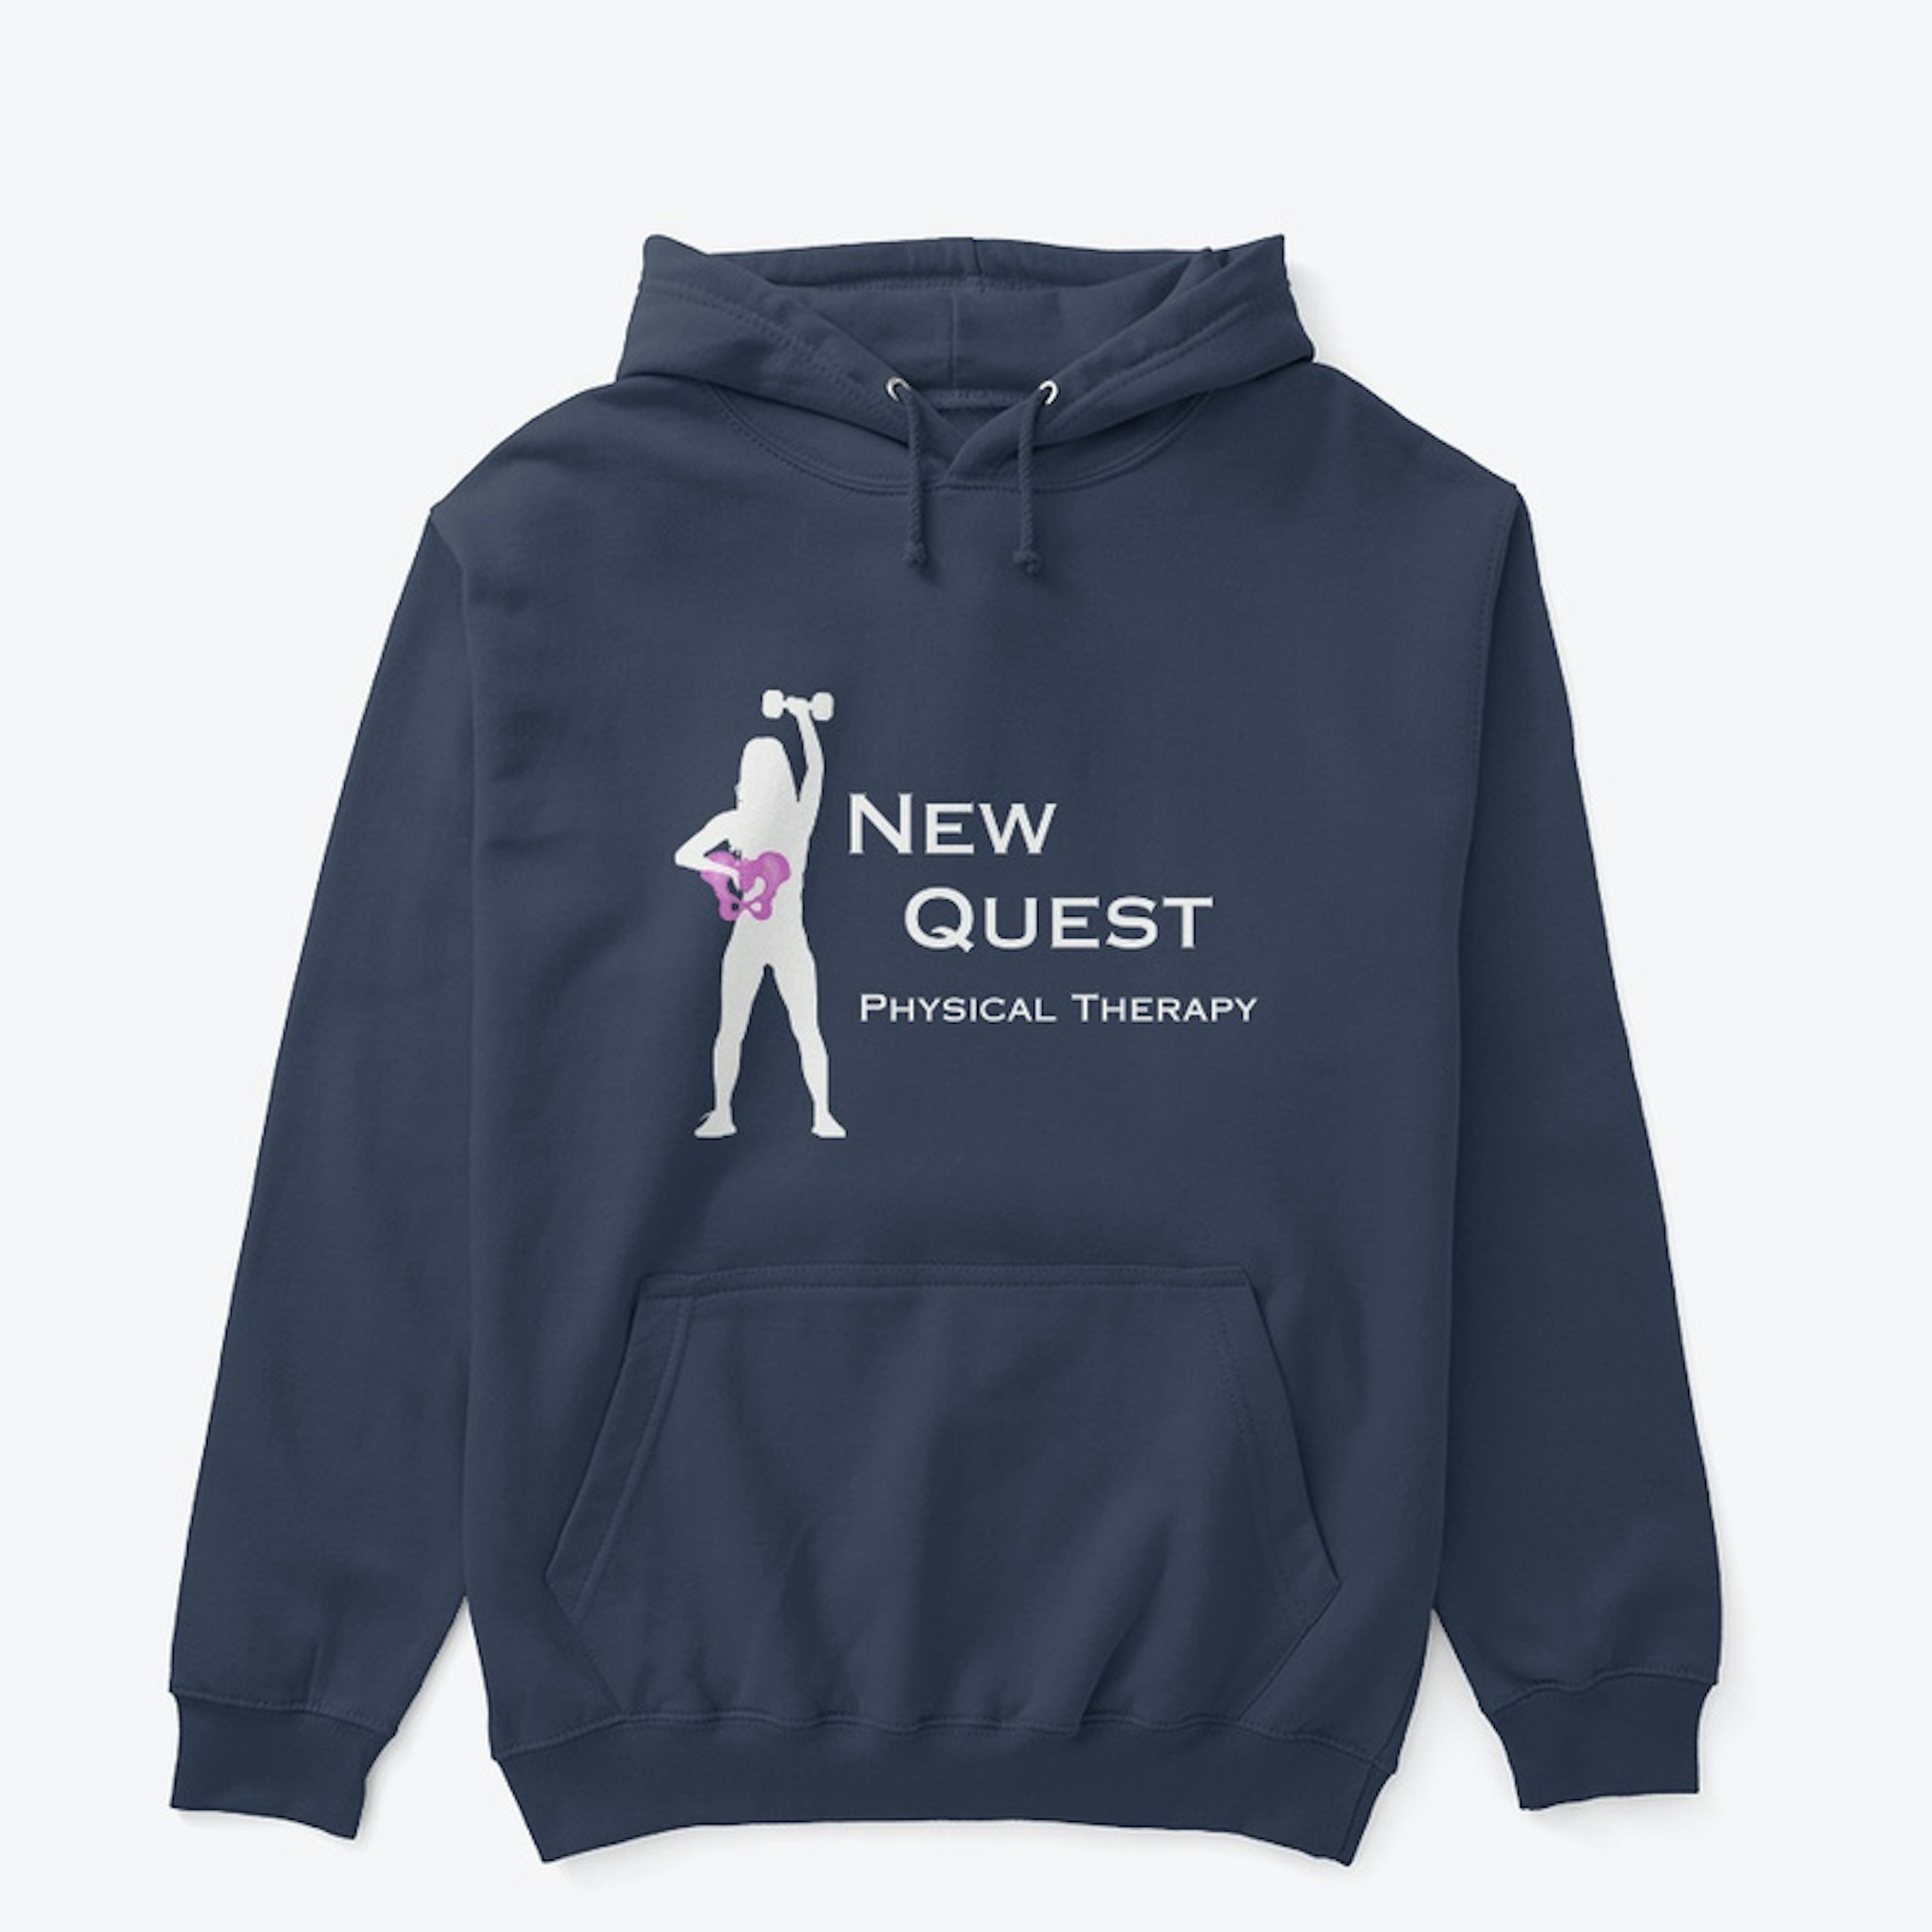 The New Quest Collection